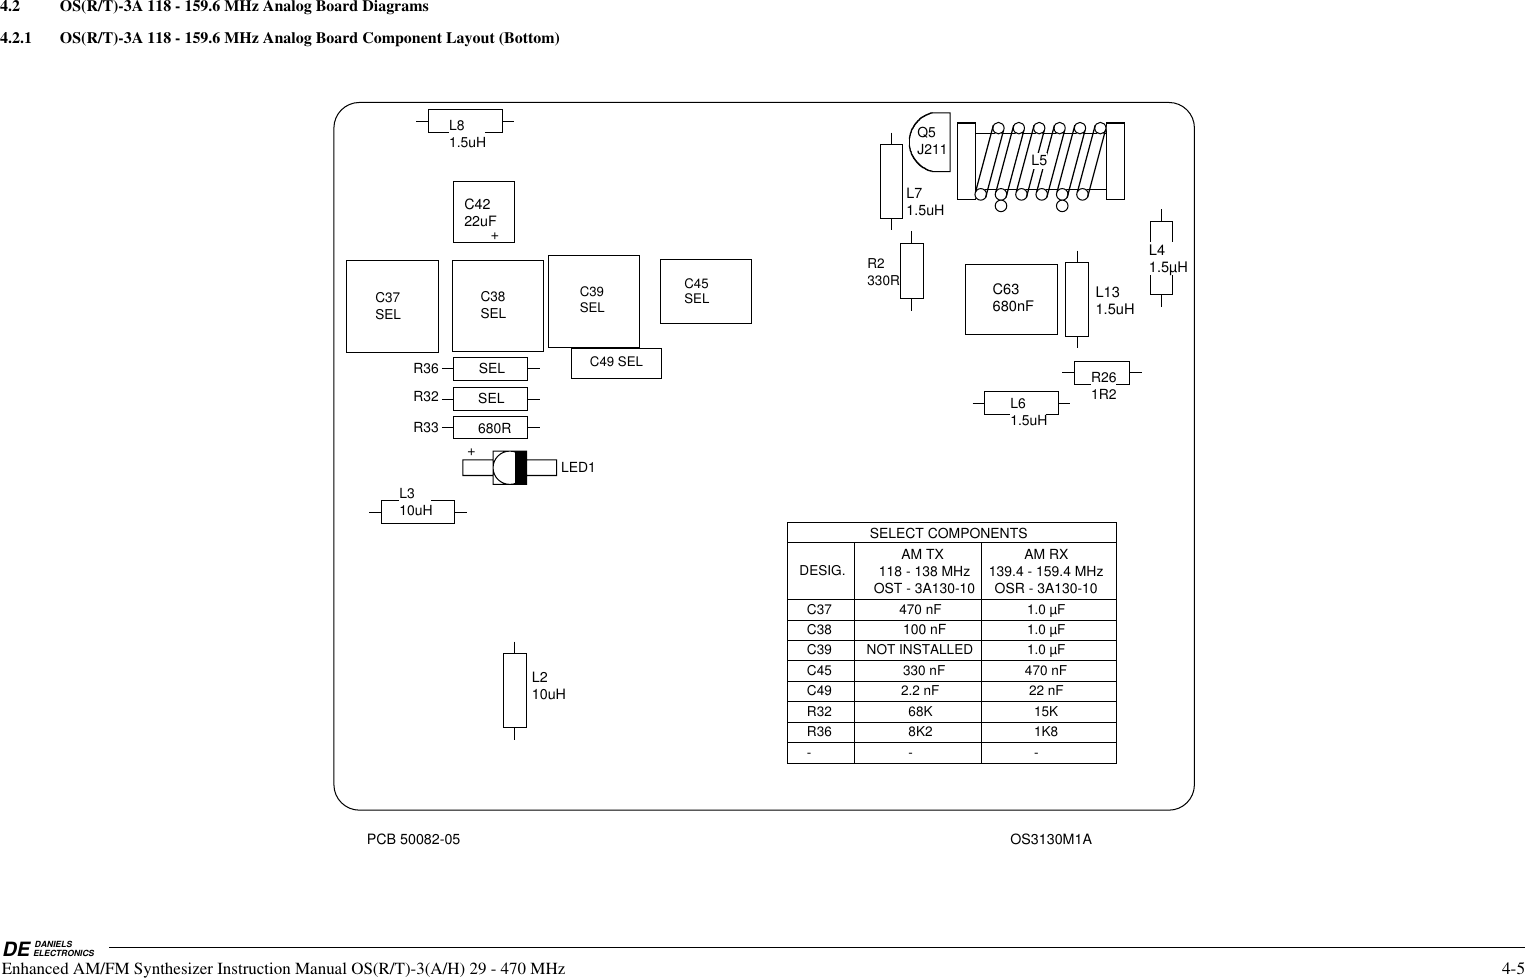 DATE:   APR 18, 1999DWG No:TBADANIELSELECTRONICS VICTORIA, B.C.TITLE:   OS-3A130 ANALOG BOARD OUTLINEBOARD No.:DWG REV DATE:  22 DEC 9950082-05PCB 50082-05DWG No:TBATITLE:   OS-3A130 ANALOG BOARD BOTTOM THROUGH HOLE LAYOUTL41.5µHL61.5uHR261R2L81.5uHL310uHL210uHC4222uF+C45 SELL71.5uHC37SELC39 SELL5R2330RC38SELC49 SELR36R32R33SEL680RSELLED1+AM TX 118 - 138 MHzOST - 3A130-10AM RX139.4 - 159.4 MHzOSR - 3A130-10DESIG.C39C45C49R32R36SELECT COMPONENTSNOT INSTALLED22 nF2.2 nF1.0 µF330 nF 470 nF15K68K1K88K2C38 100 nF 1.0 µFC37 470 nF 1.0 µFQ5J211- --L131.5uHC63680nFDWG No:TBATITLE:   OS-3A130 AM WIDEBAND ANALOG BOARD BOTTOM T.H. DESIGNATIONSDWG No:OS3A130AT5Enhanced AM/FM Synthesizer Instruction Manual OS(R/T)-3(A/H) 29 - 470 MHz 4-54.2          OS(R/T)-3A 118 - 159.6 MHz Analog Board Diagrams4.2.1       OS(R/T)-3A 118 - 159.6 MHz Analog Board Component Layout (Bottom) OS3130M1ADE DANIELSELECTRONICS